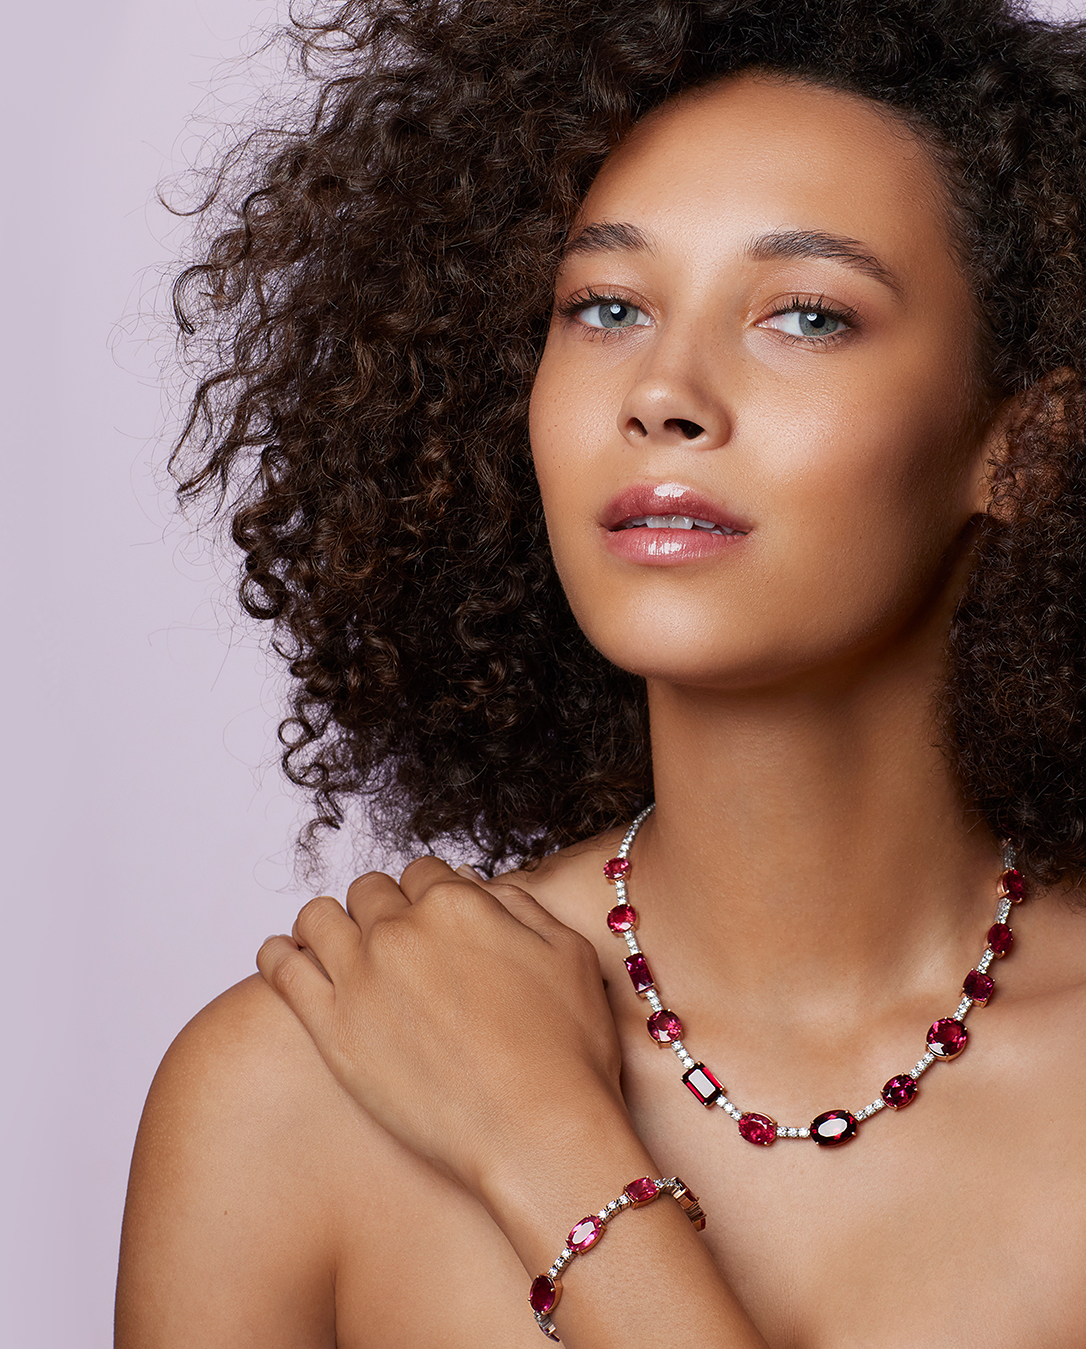                 Our One of a Kind Rubellite Gemmy Gem Diamond Tennis Necklace and Bracelet are the perfect seasonal hues of warm red and rich pink.SHOP RUBELLITE GEMMY GEM            